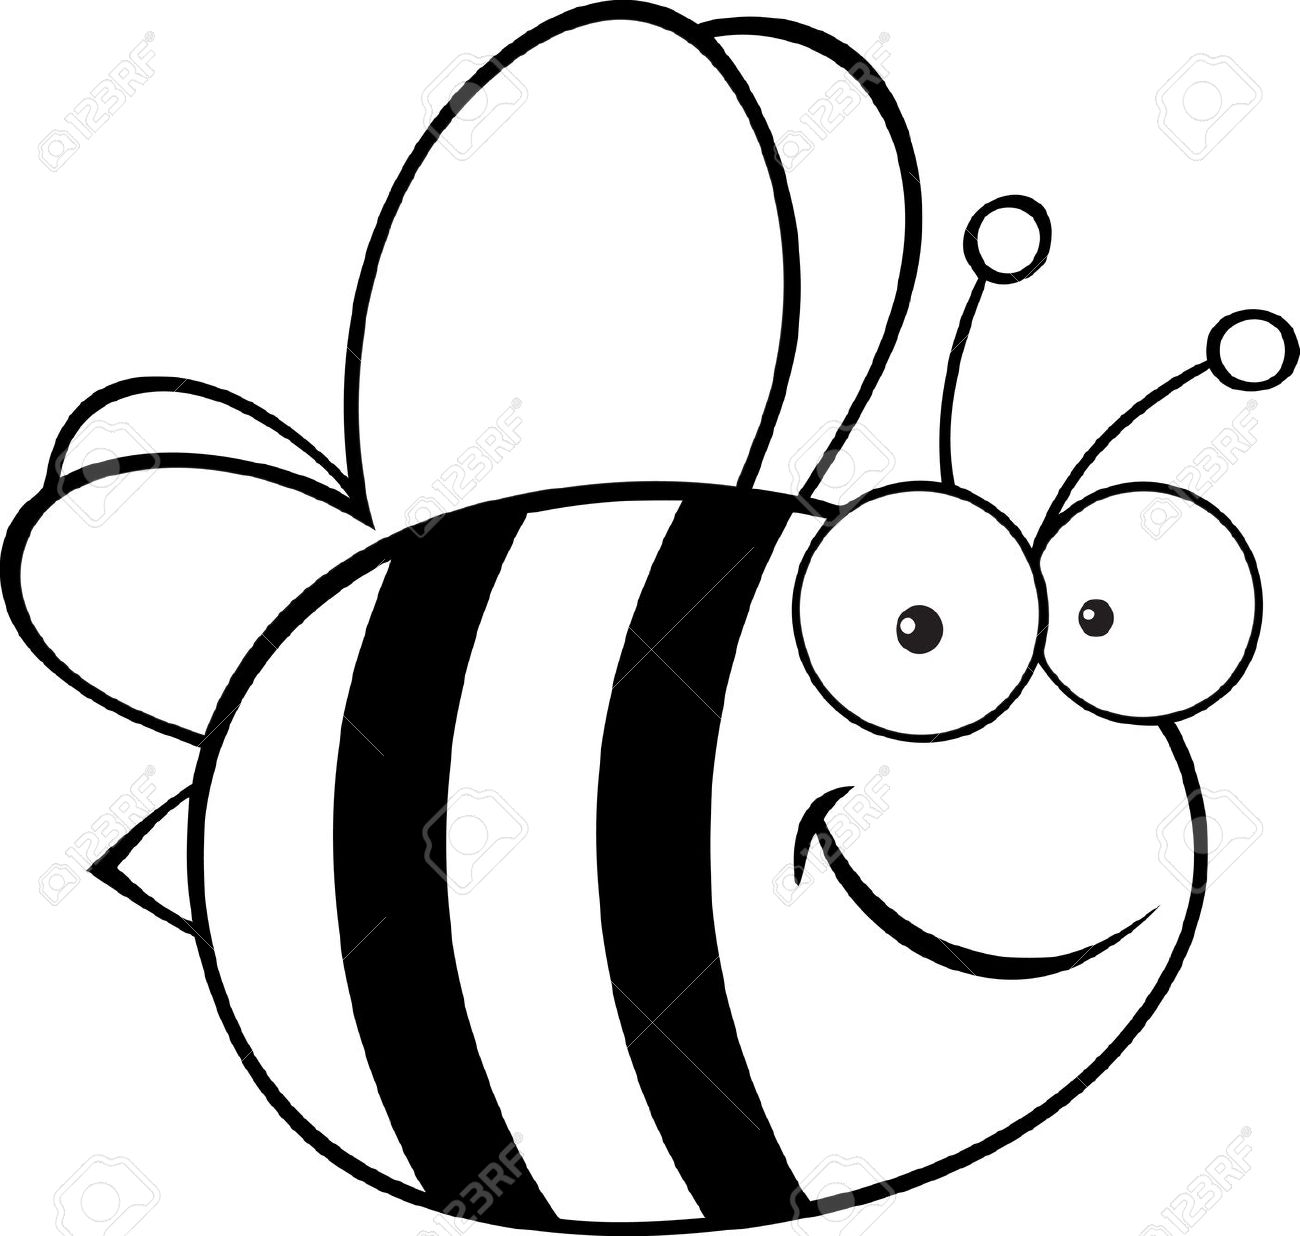 Black And White Bee Clipart. Outlined Cute Cartoon Bee .